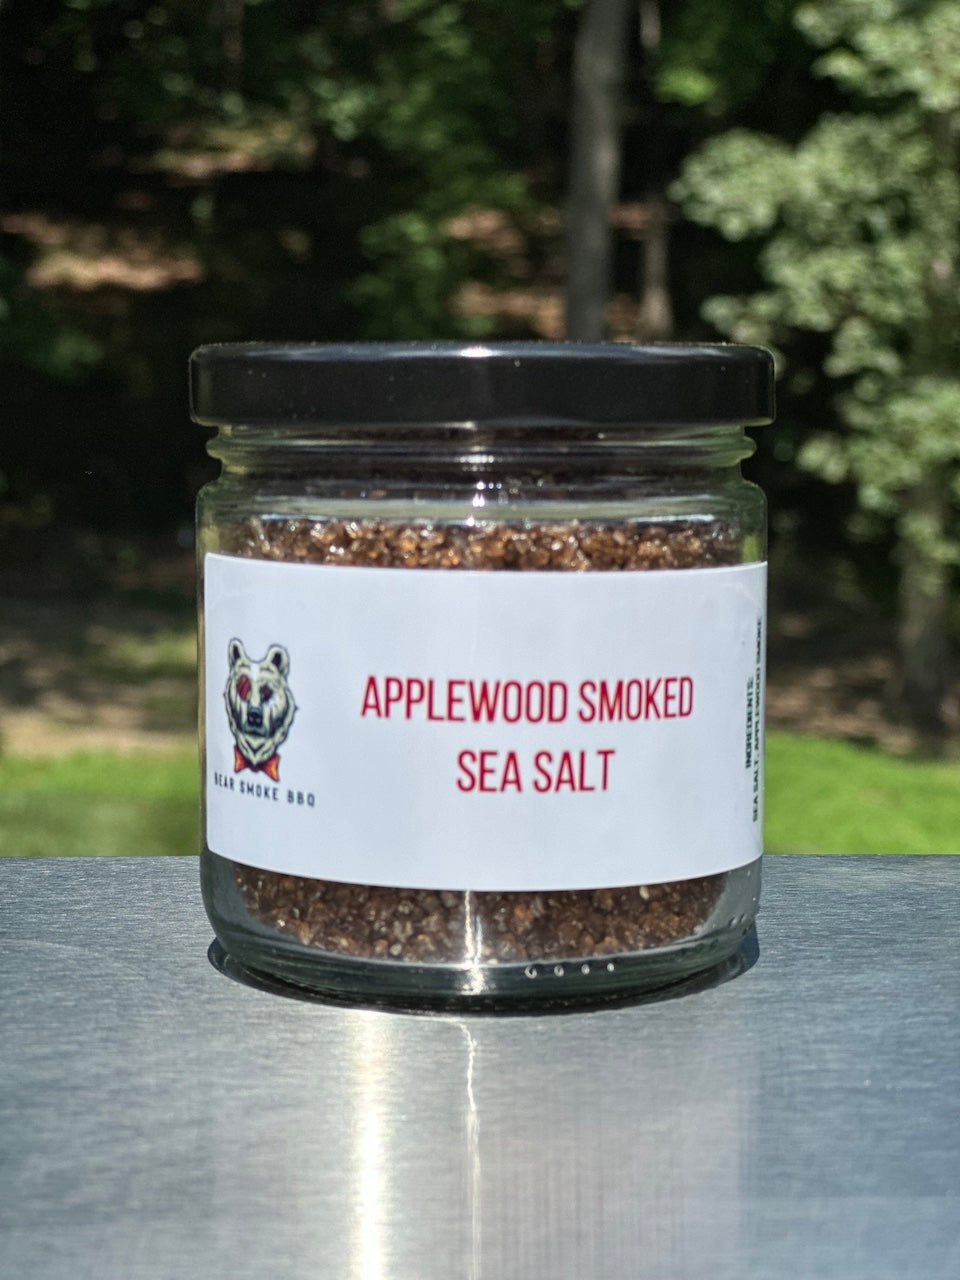 We tossed the highest quality coarse sea salt and cold smoked it for 8 hours over Applewood to infuse all of the flavors. Bear Smoke BBQ